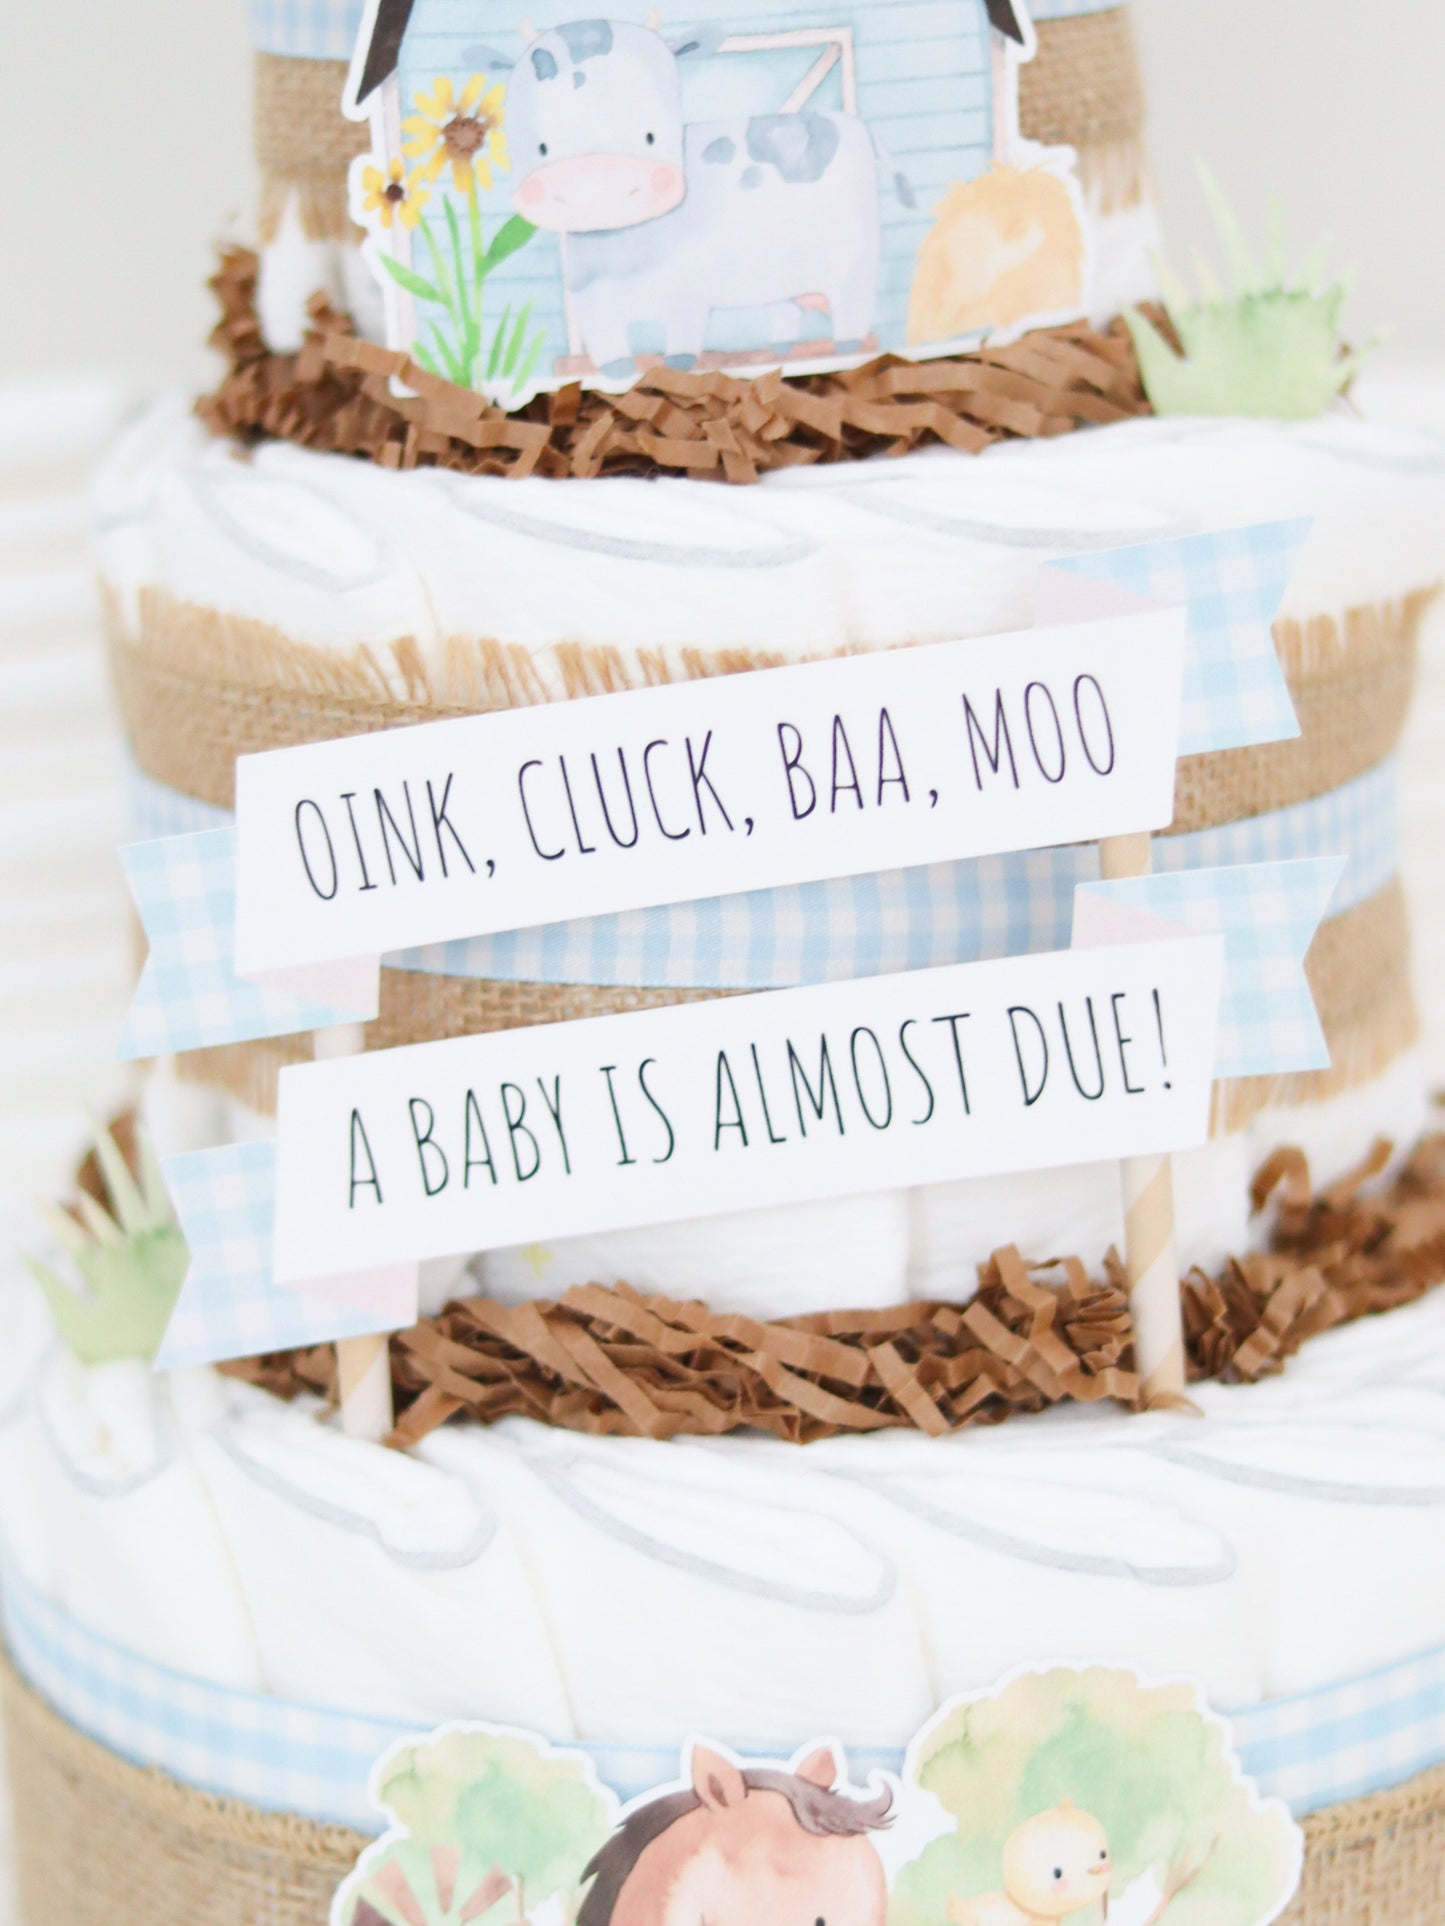 oink cluck baa moo a baby is almost due diaper cake sign